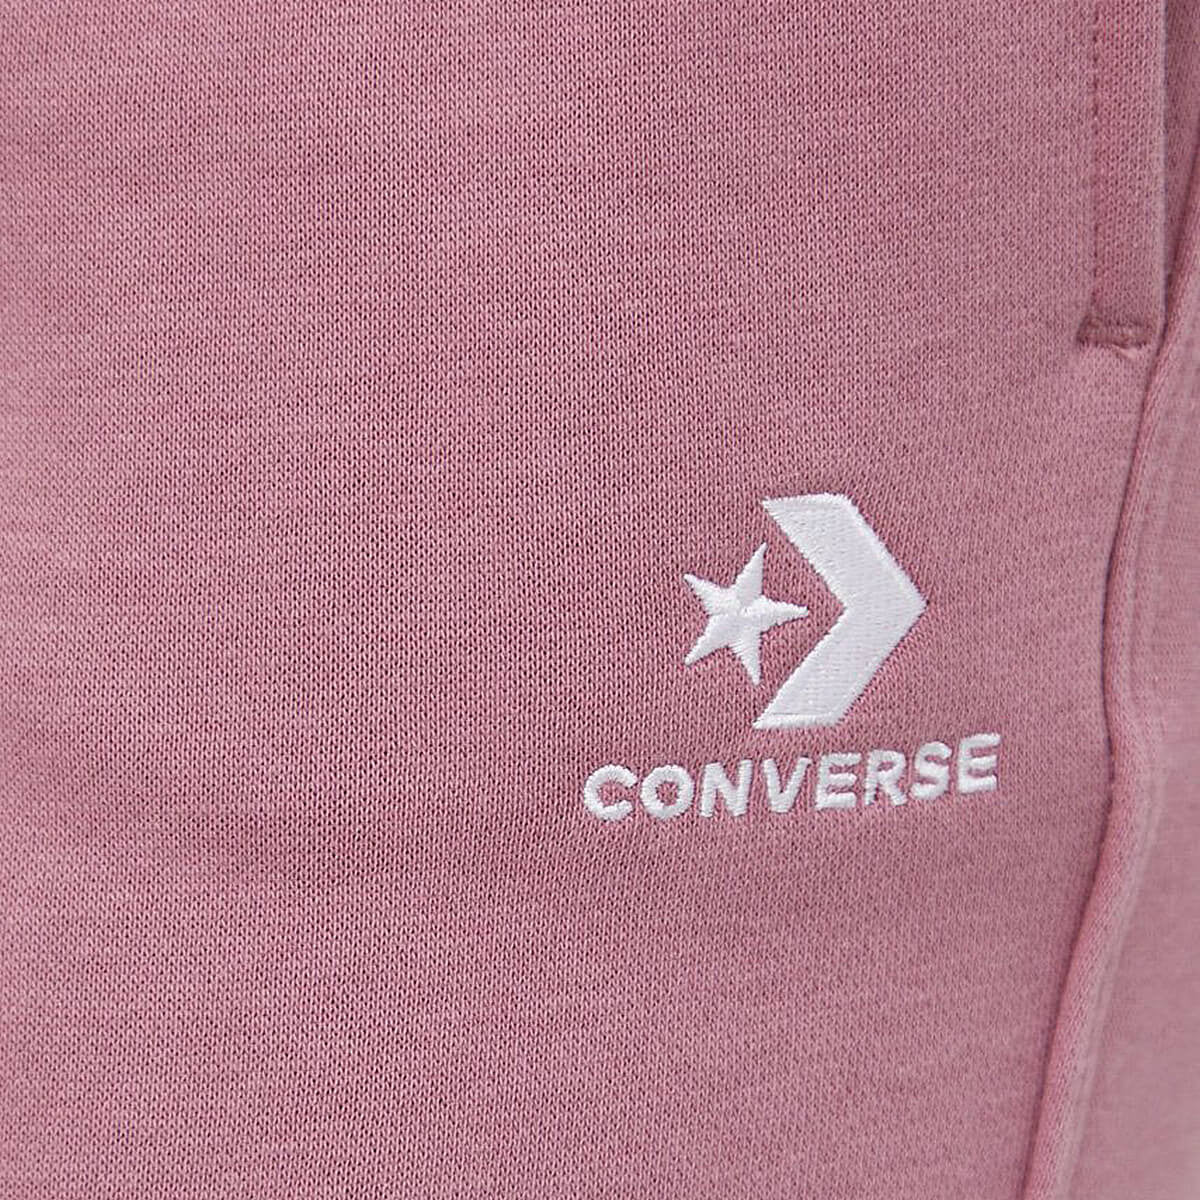 Converse Embroidered Star Chevron Pant PINK